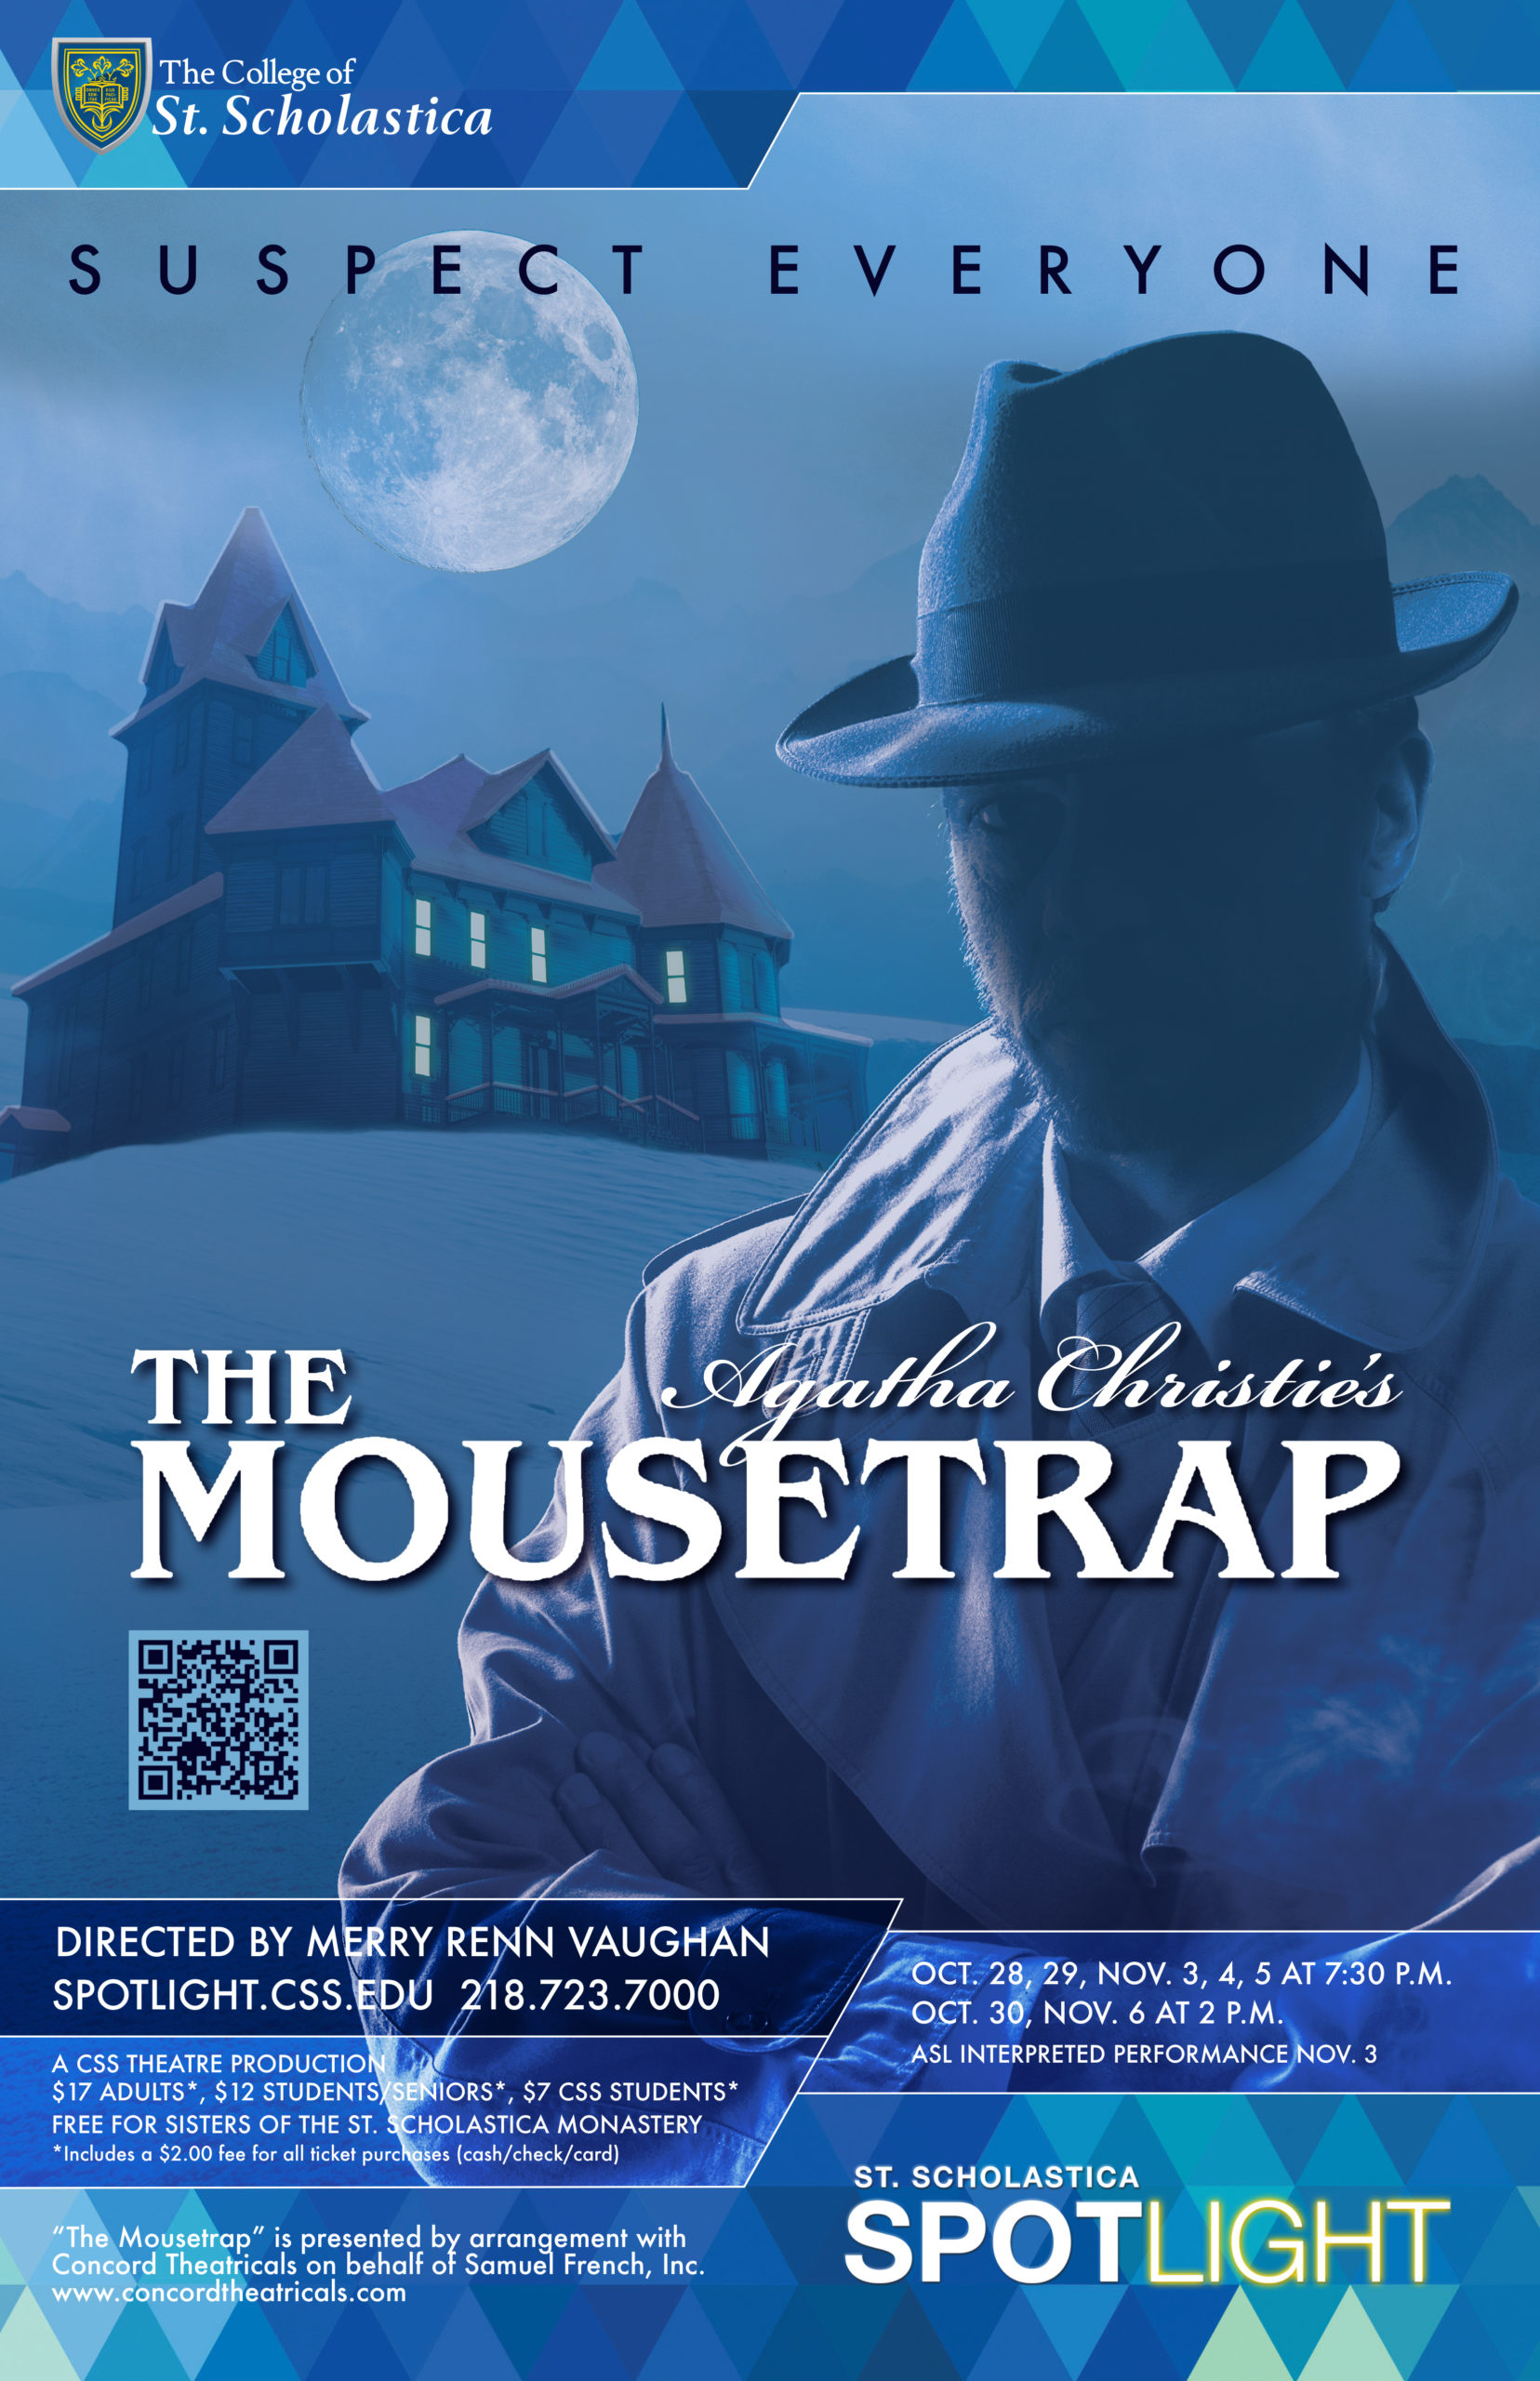 Gallery 7 Theatre takes on Agatha Christie classic 'The Mousetrap